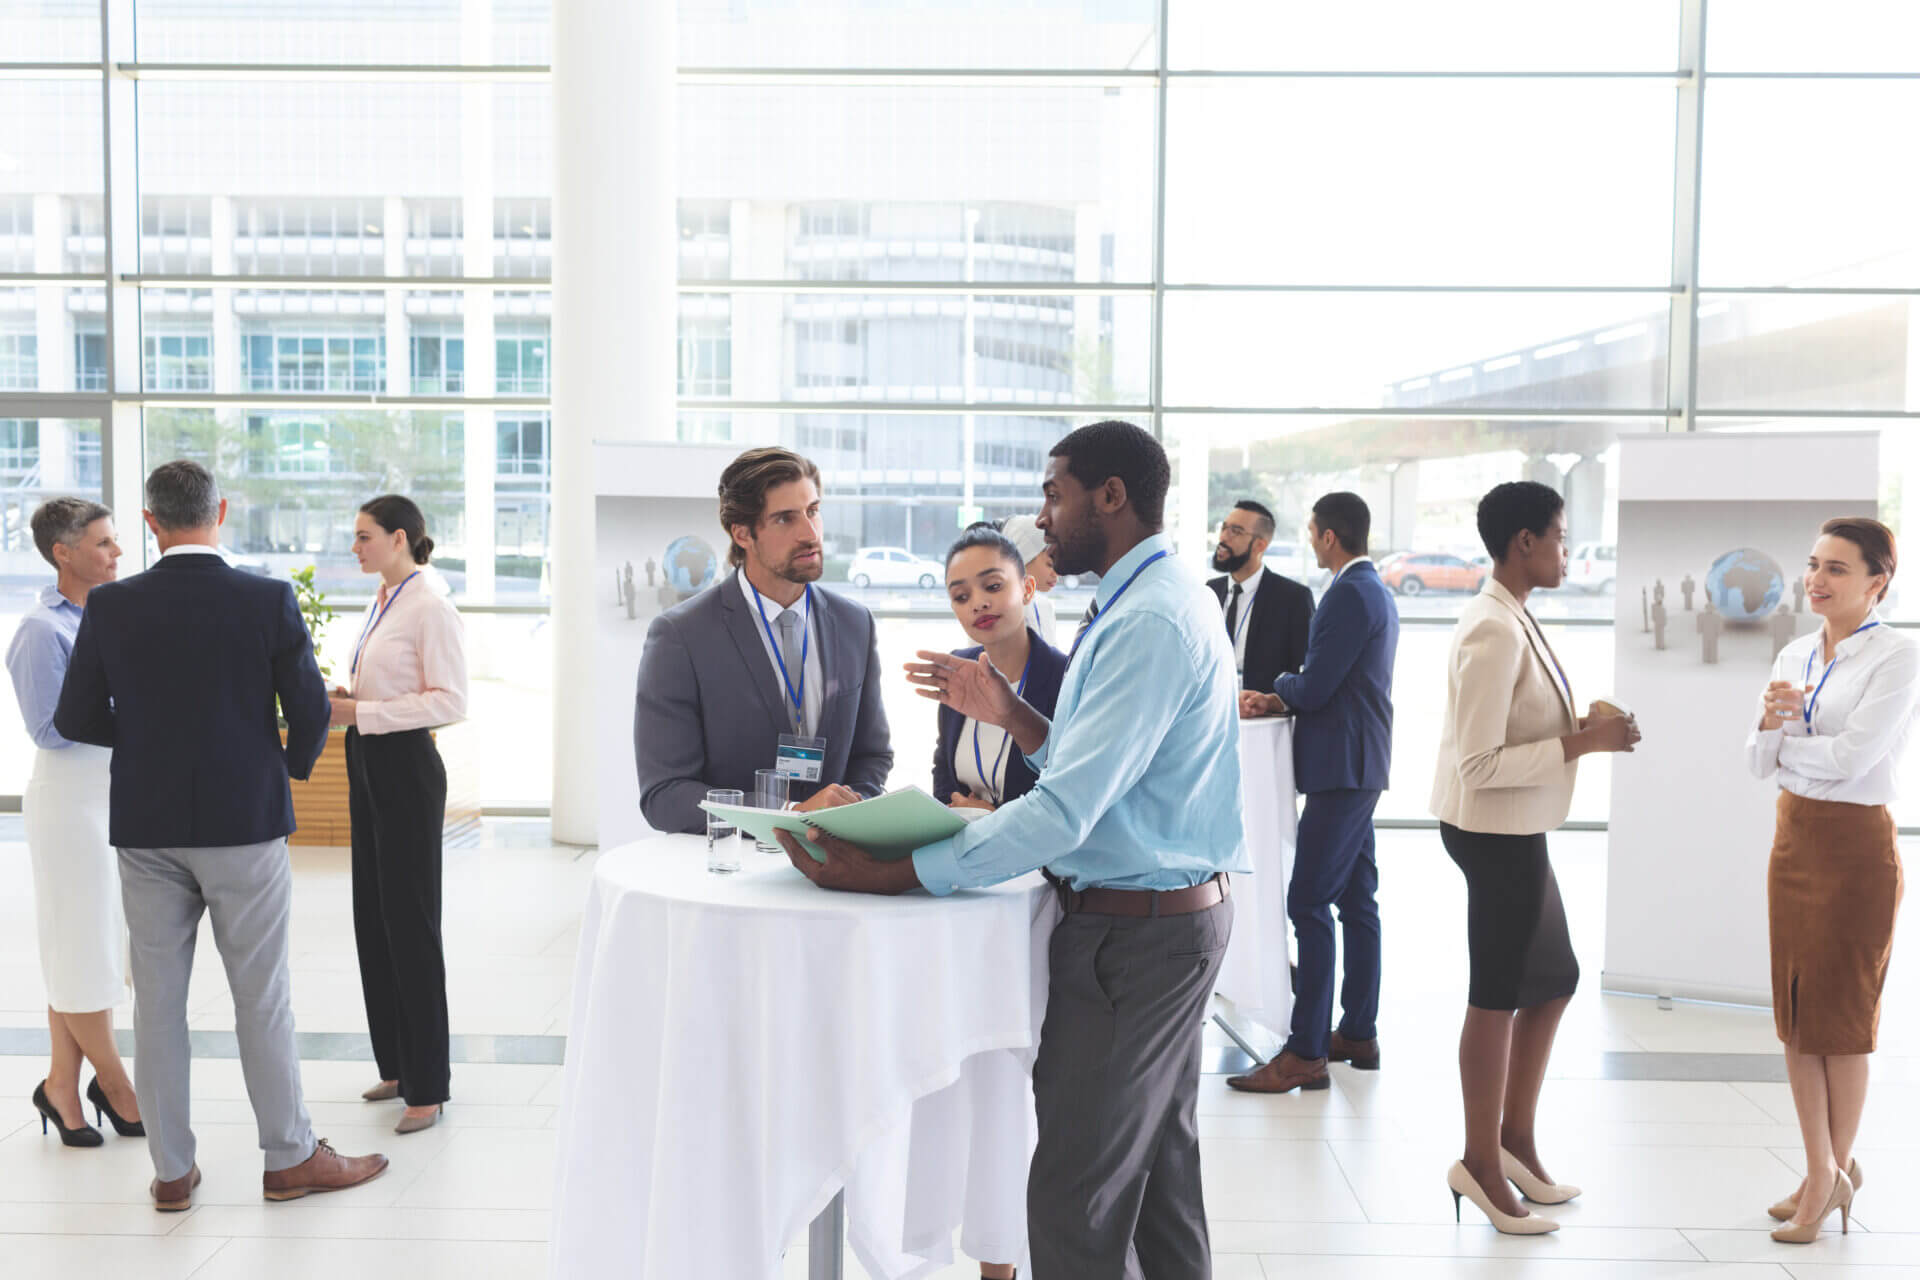 How to Network with the Intent of Hiring for Your Small Business